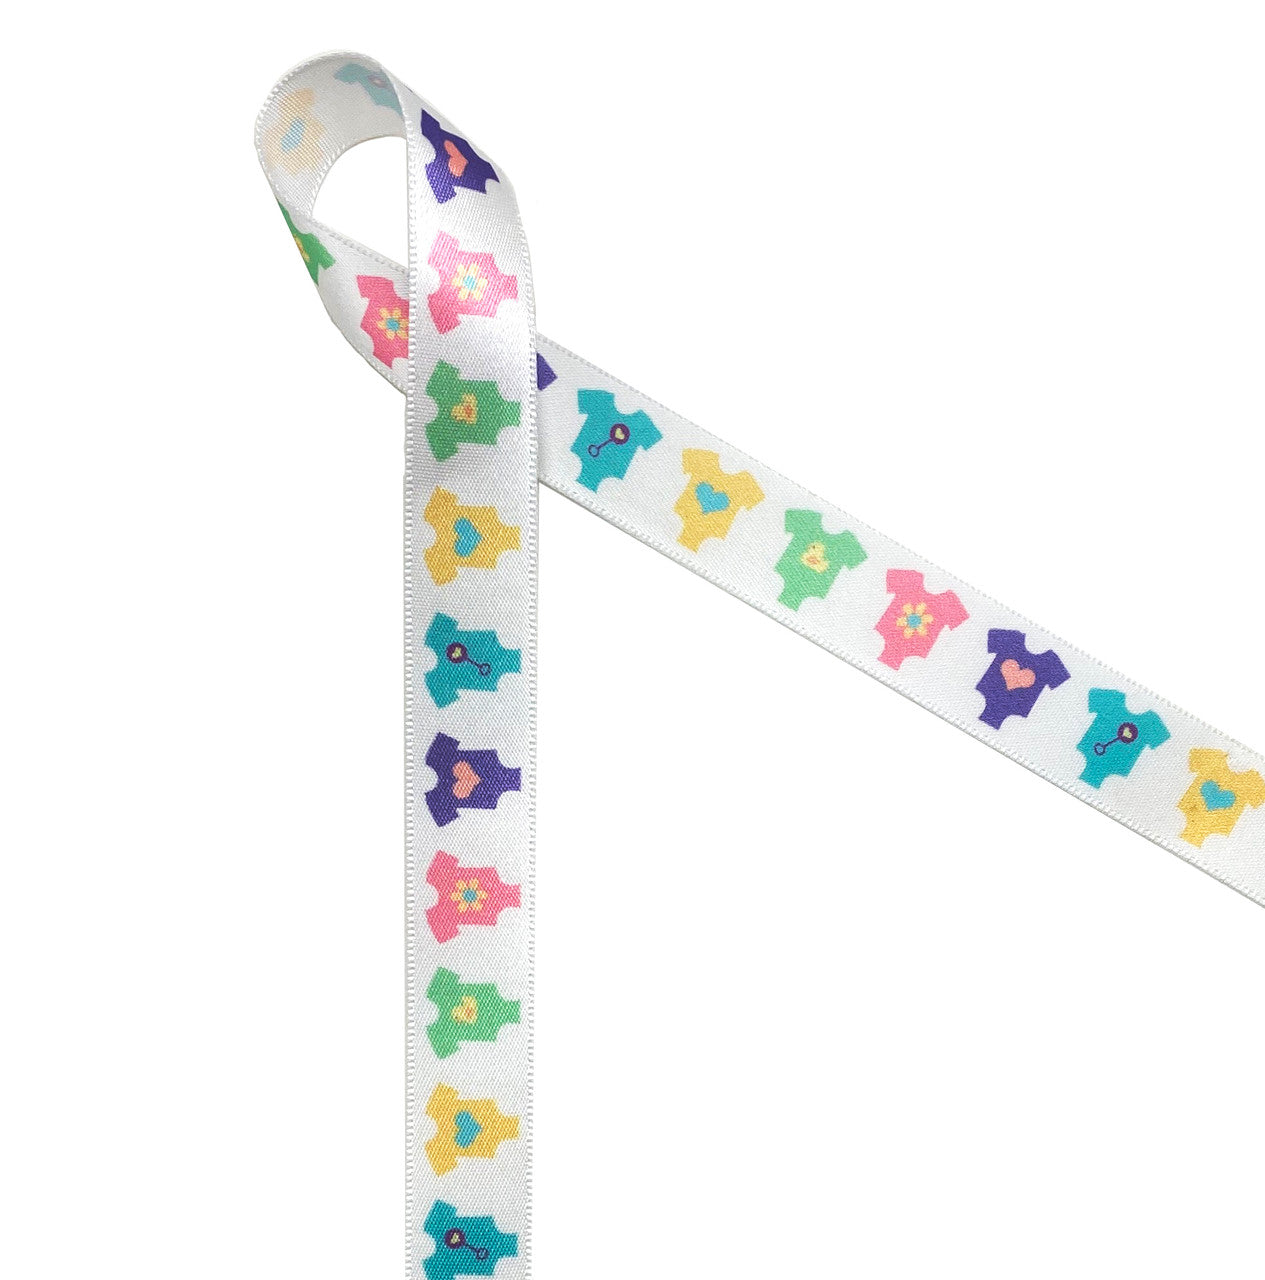 Onesies Ribbon, Baby design in pastel colors on 5/8" white single face satin